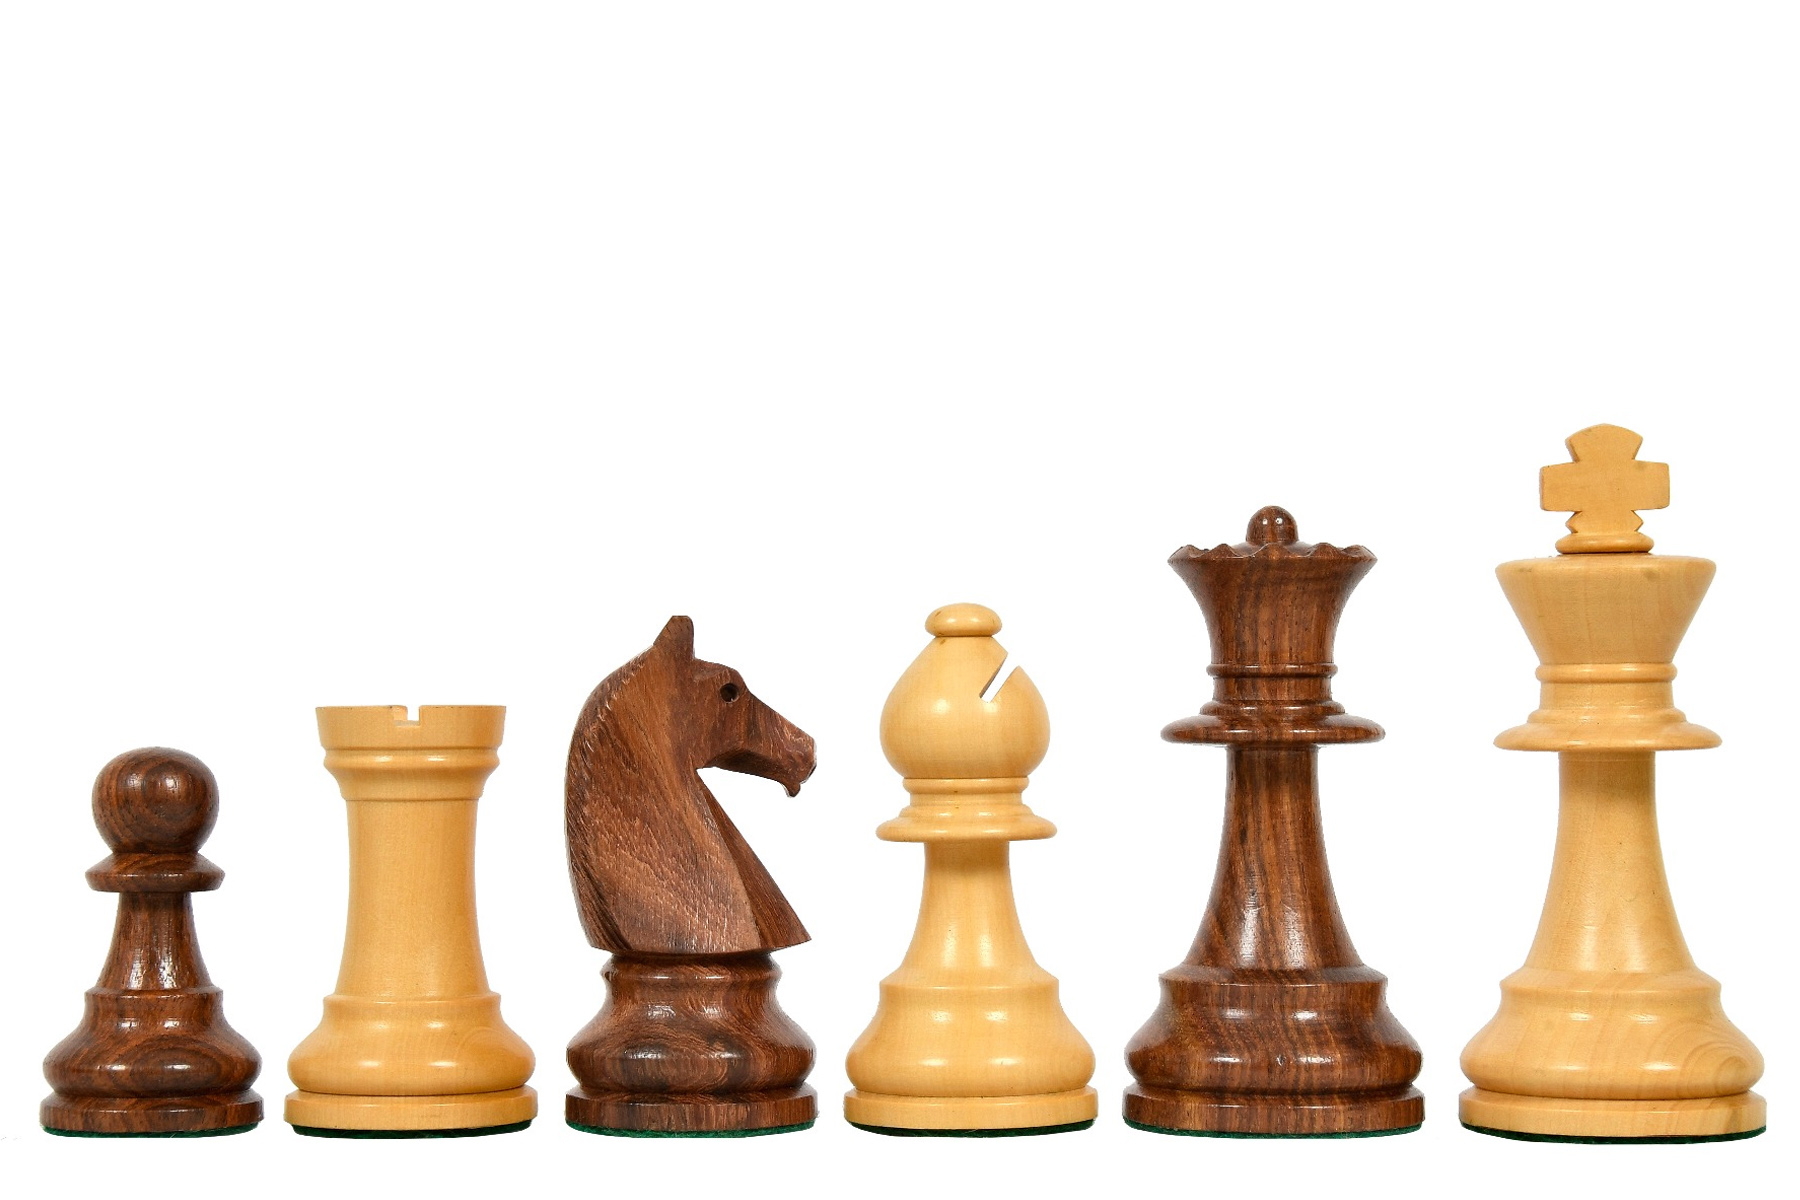 Repro 90s French Tournament Chess Pieces V2.0 in Sheesham Box Wood 3.6" King 